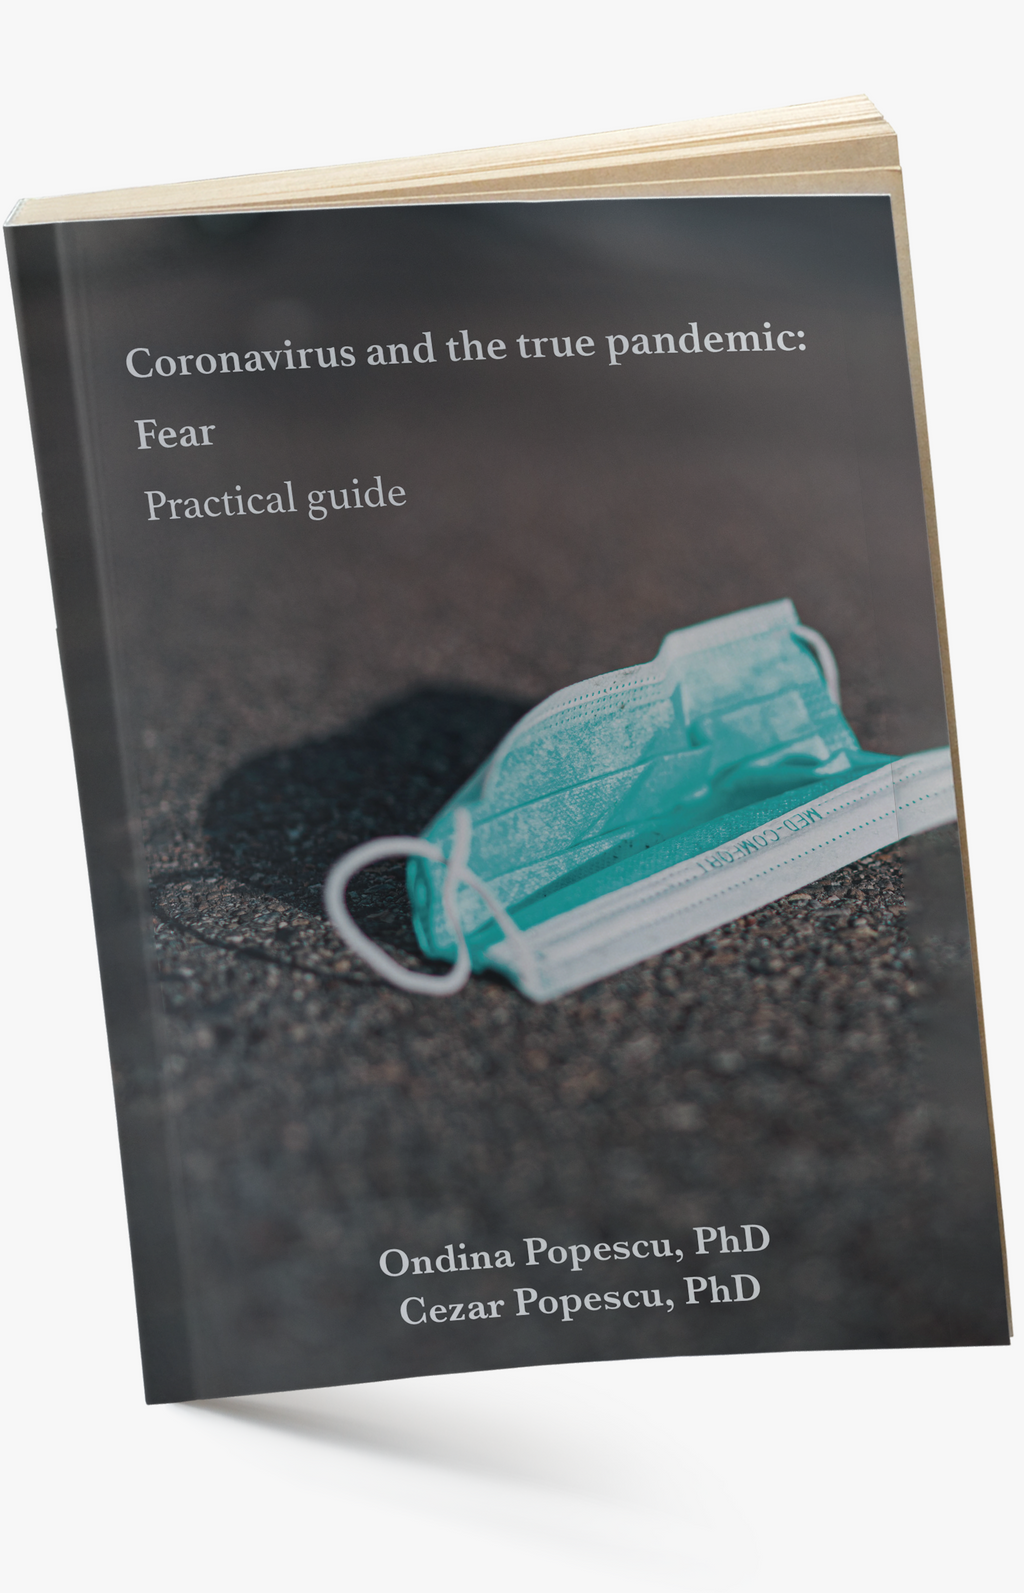 Coronavirus and the true pandemic: Fear - Practical Guide